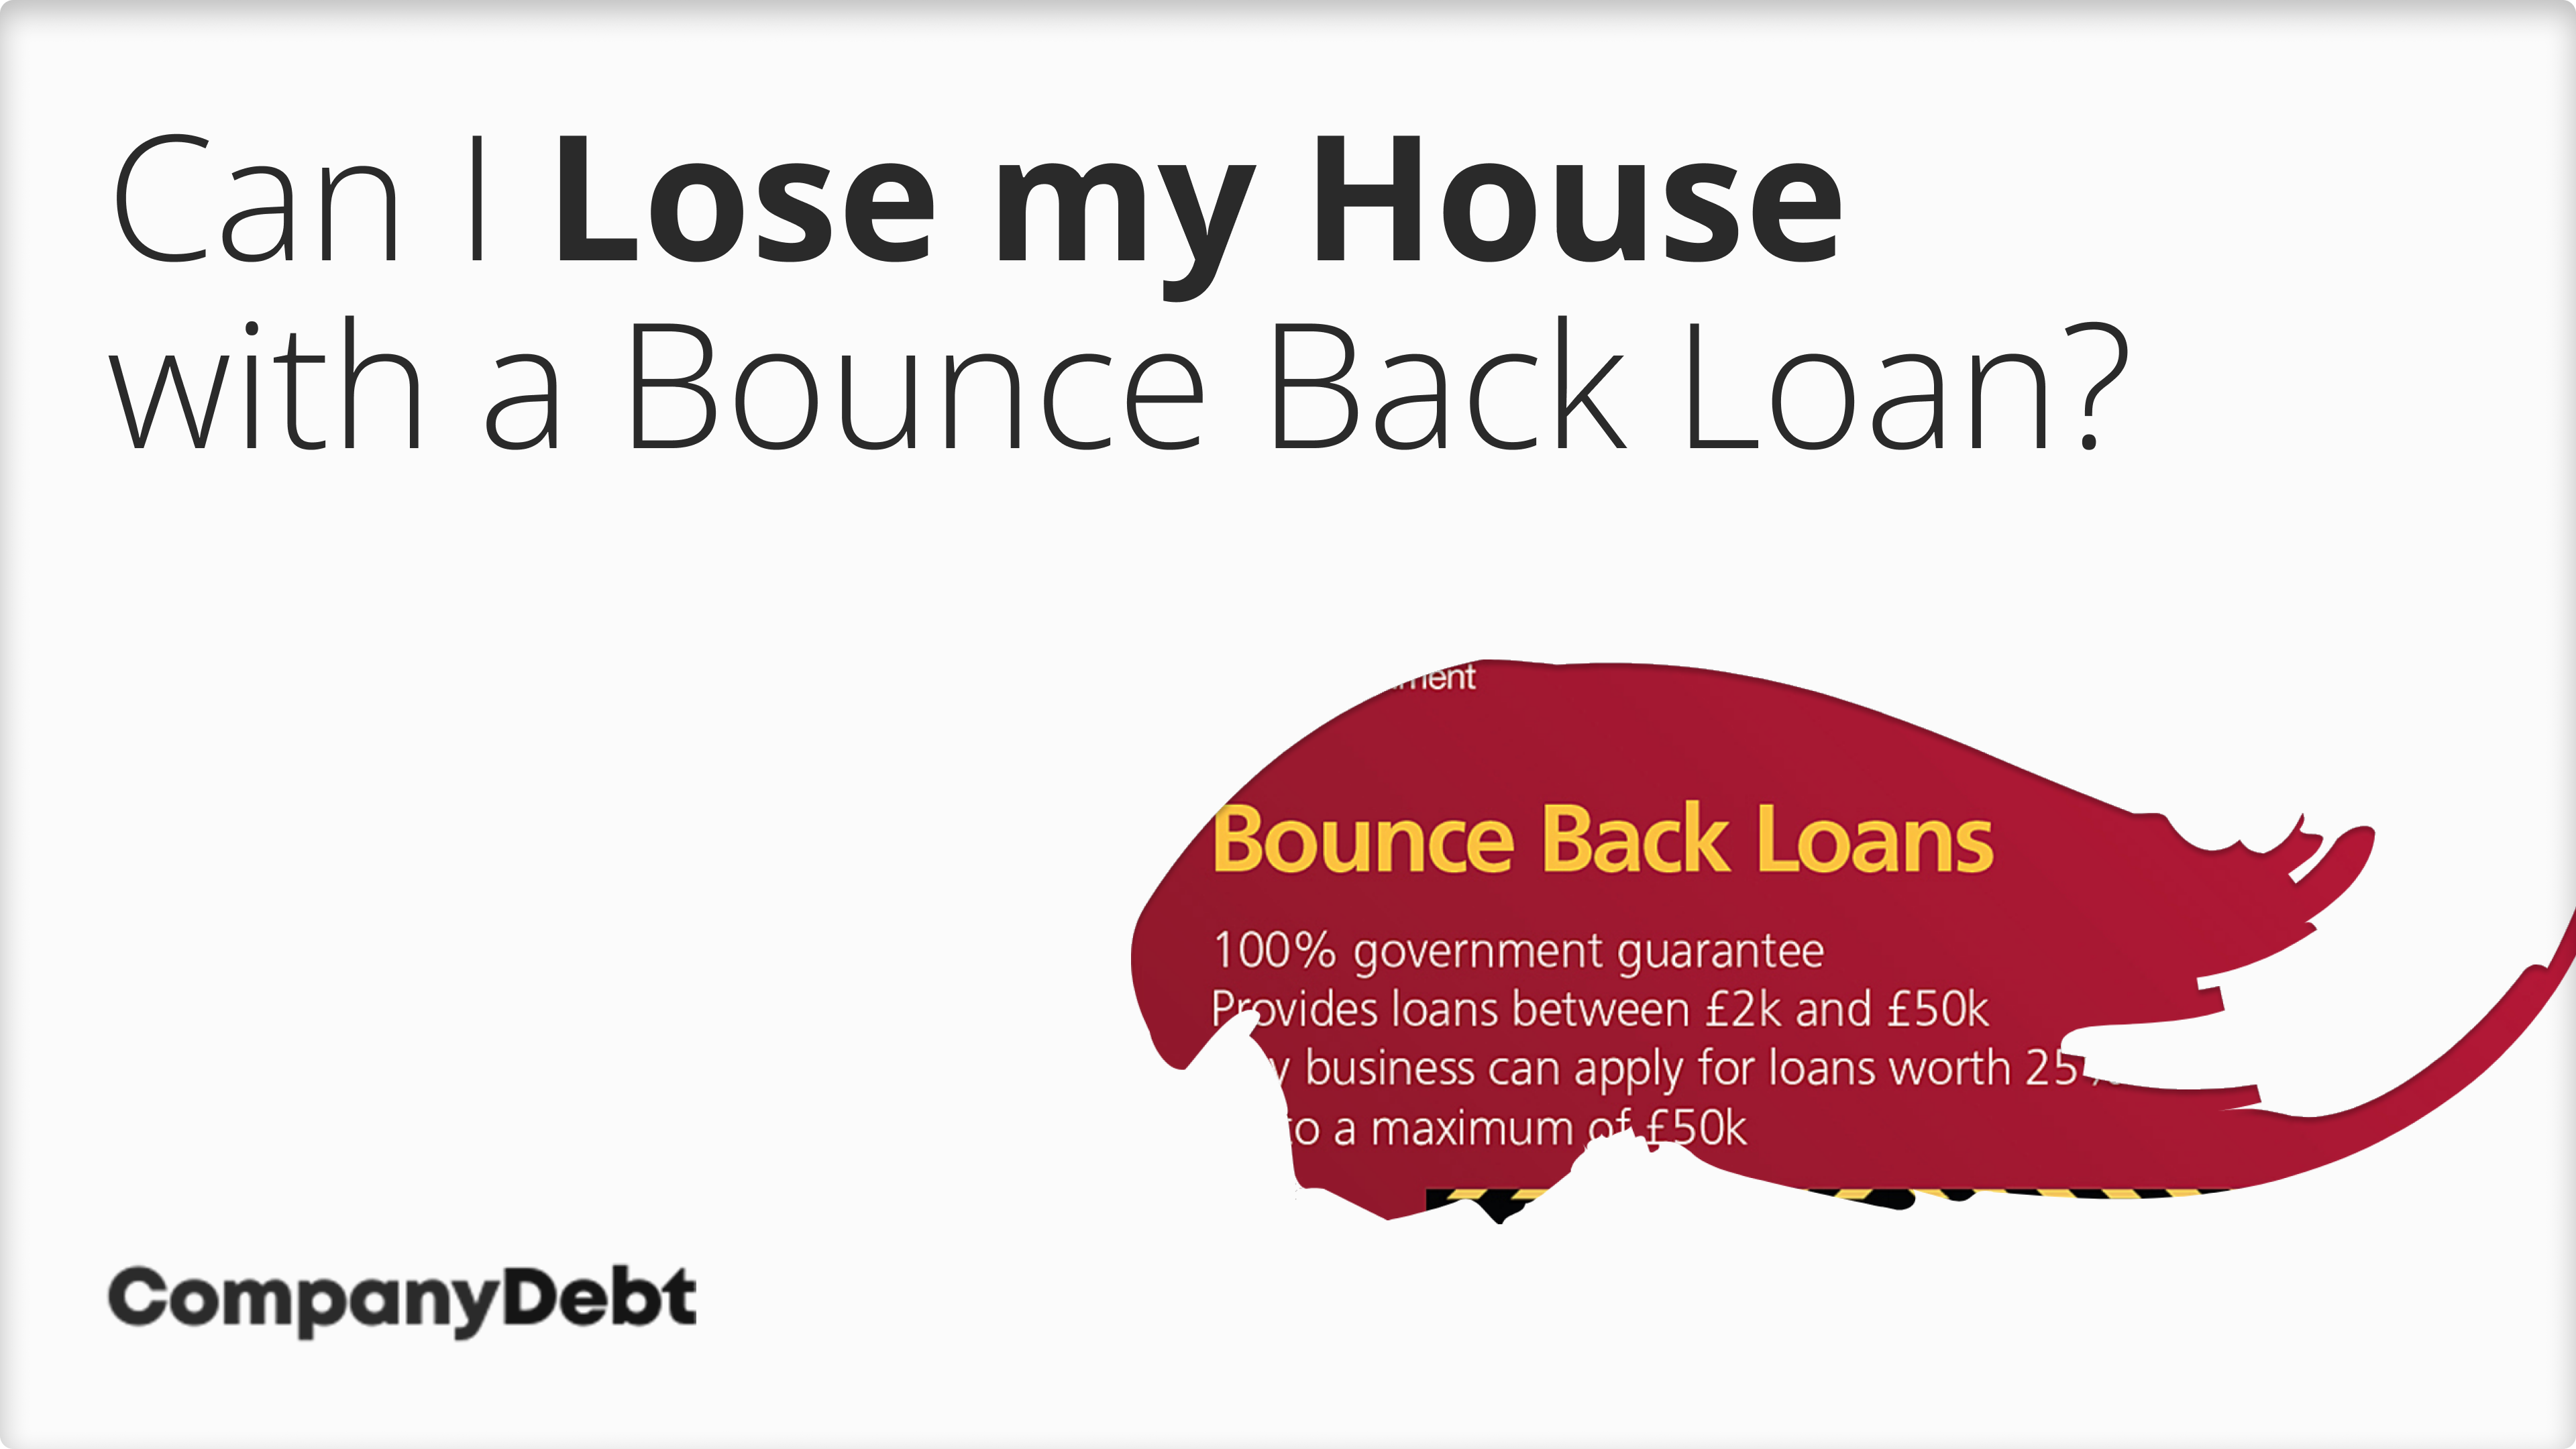 Can-I-Lose-my-House-with-a-Bounce-Back-Loan_